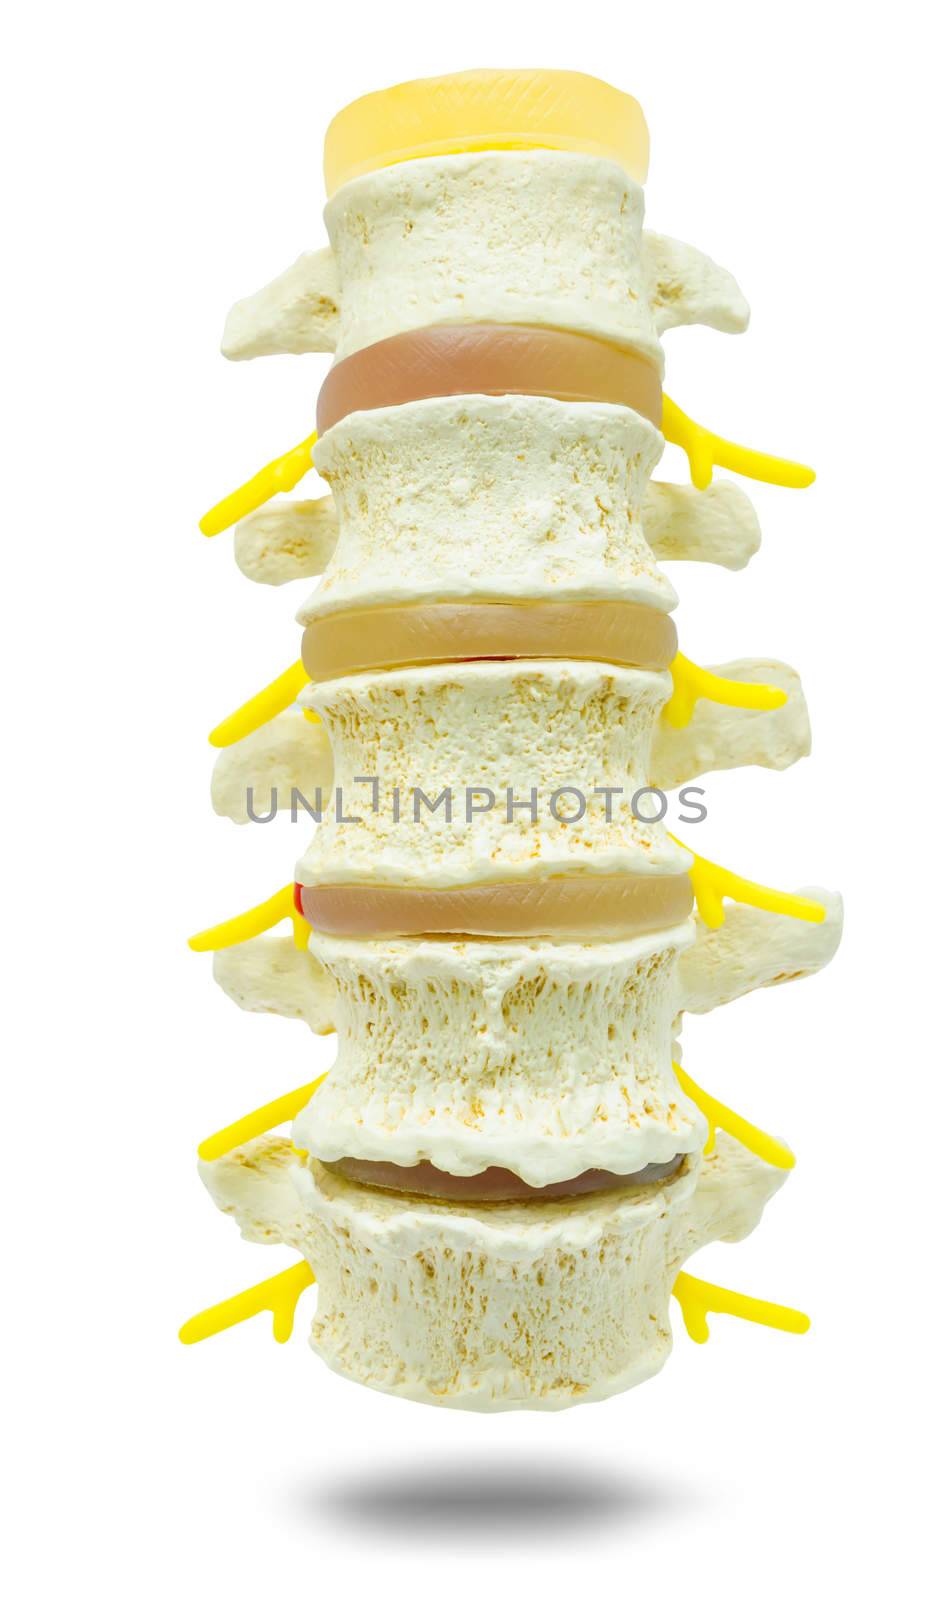 lumbar part of a spine preparation for study medical. by Gamjai